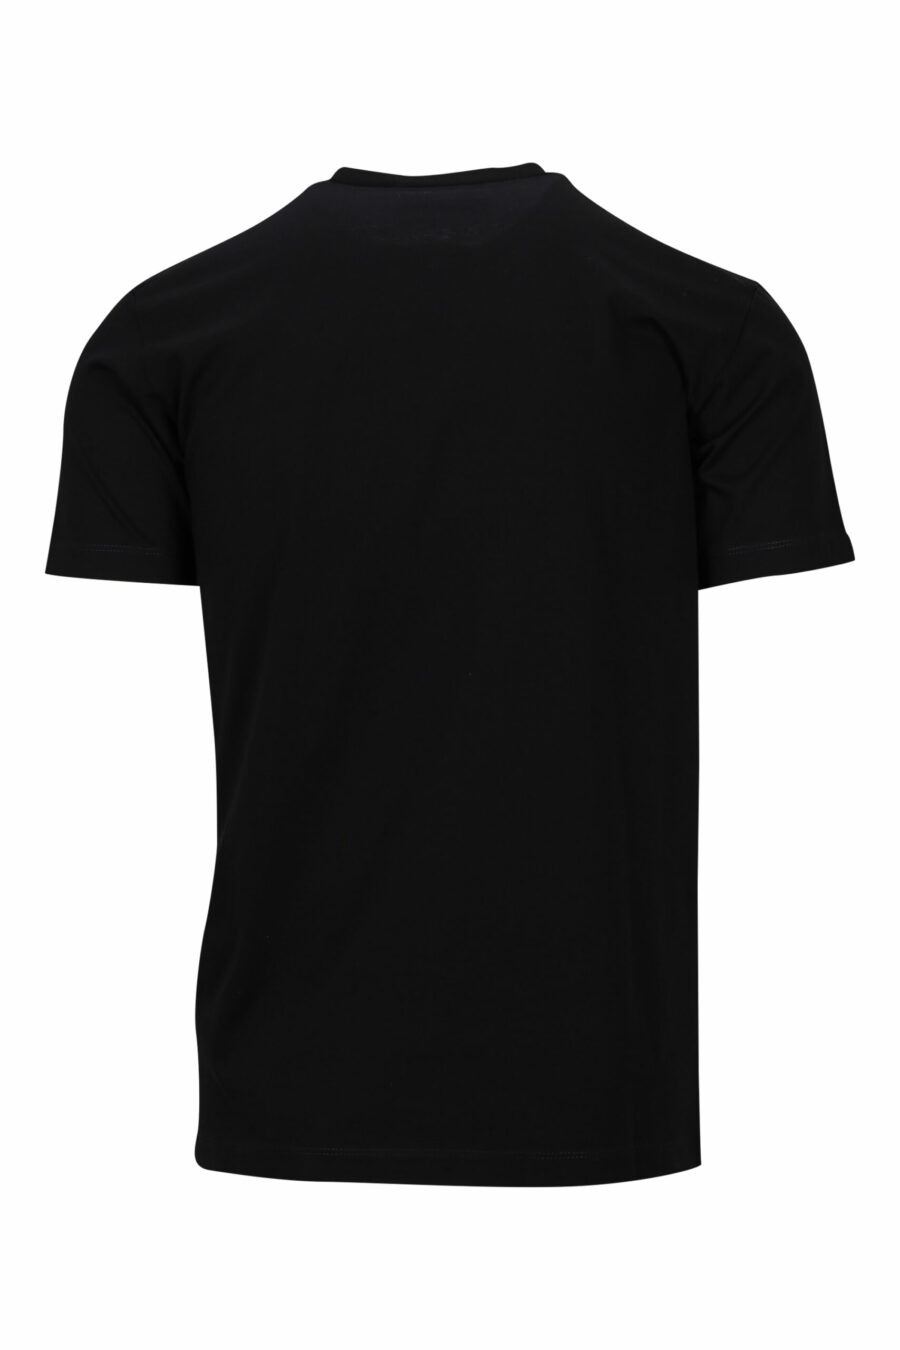 T-shirt black with logo on small plate - 8054148370800 scaled